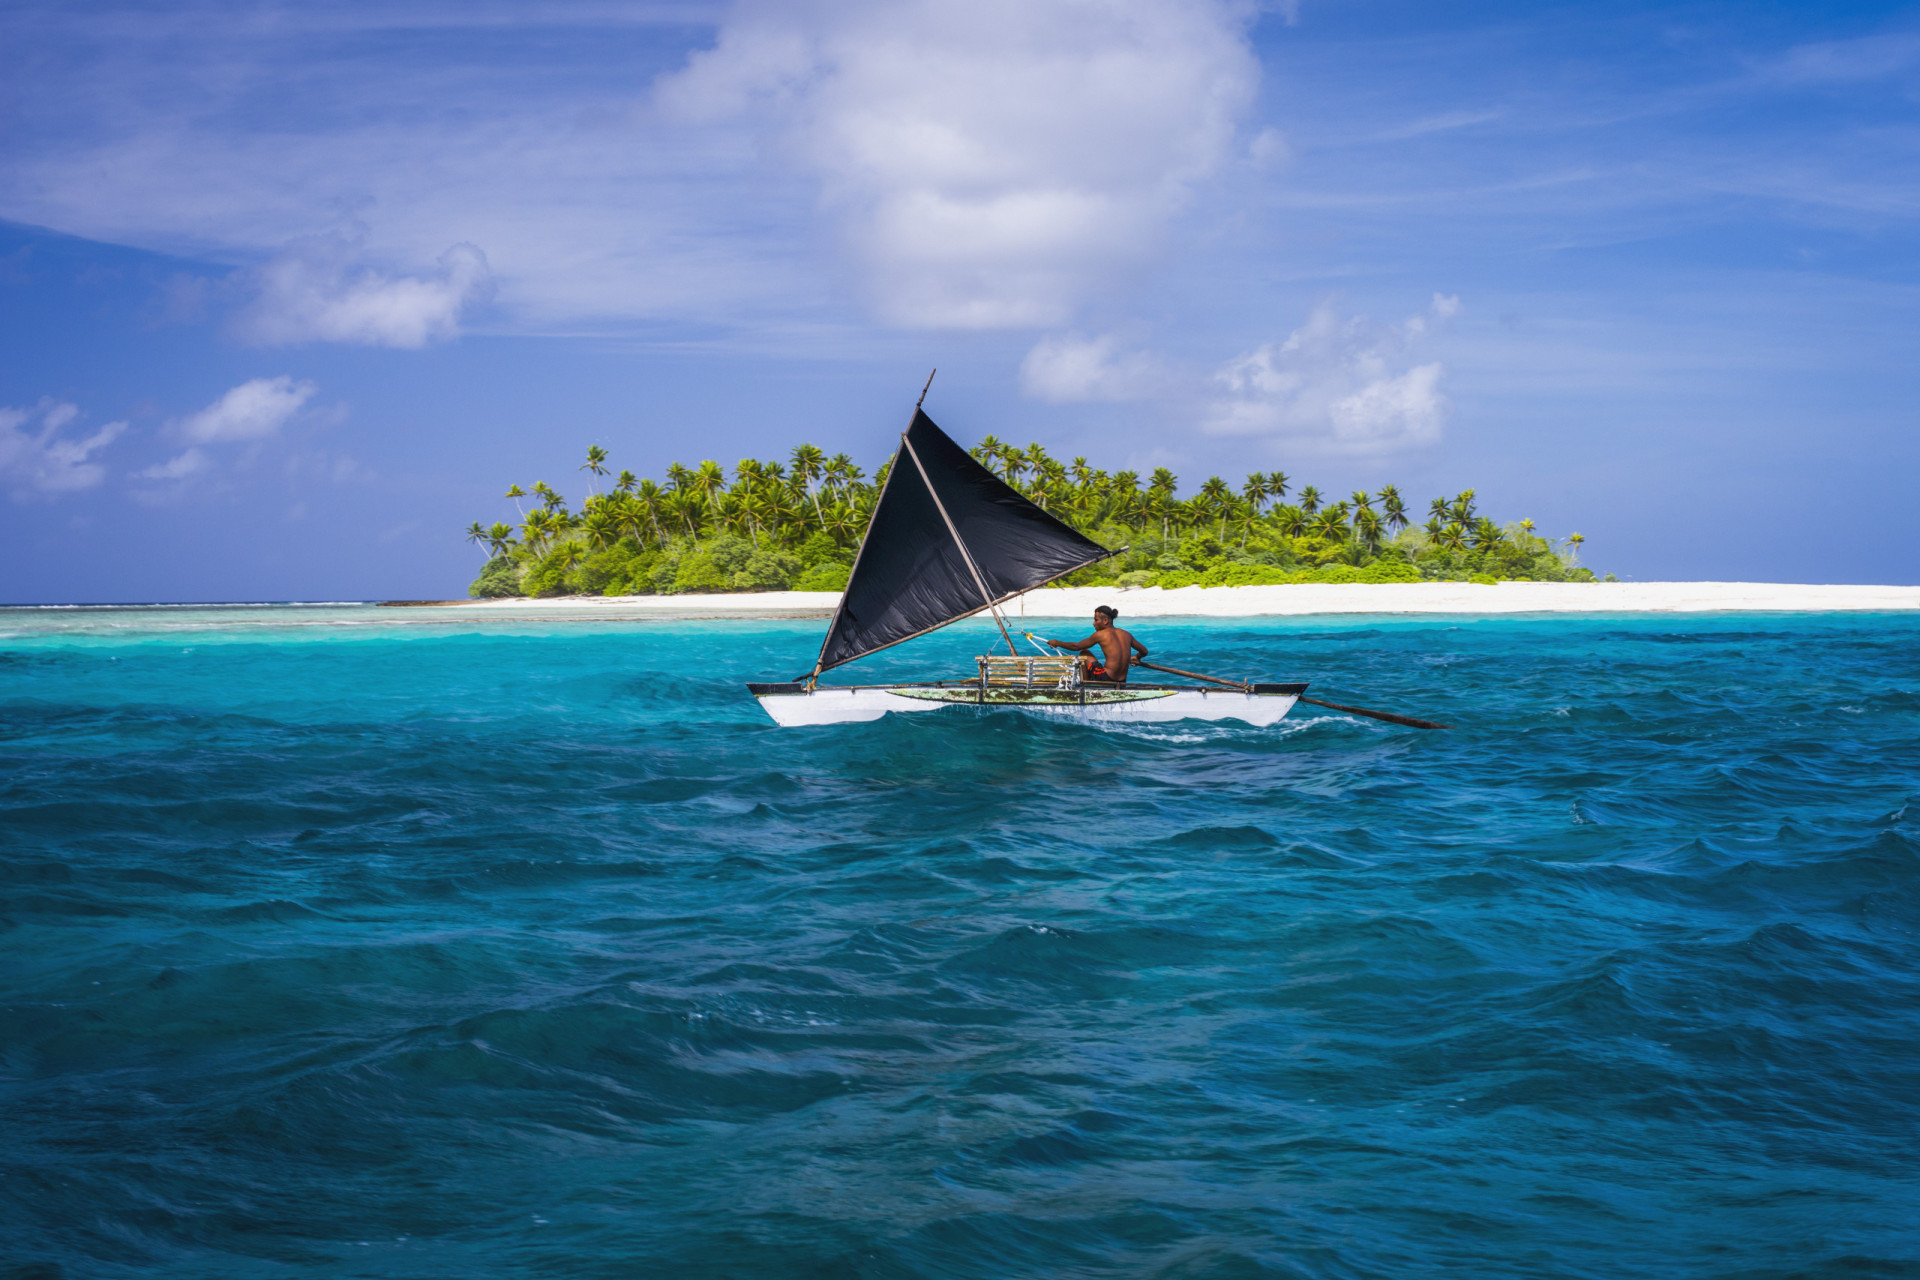 <p>Also known as Rawaki, the Phoenix Islands consist of eight atolls that lie west of the Line Islands and east of the Gilbert Islands. All but one of the atolls in this group are actually uninhabited and form part of the third largest marine protected area in the world.</p><p><a href="https://www.msn.com/en-us/community/channel/vid-7xx8mnucu55yw63we9va2gwr7uihbxwc68fxqp25x6tg4ftibpra?cvid=94631541bc0f4f89bfd59158d696ad7e">Follow us and access great exclusive content every day</a></p>